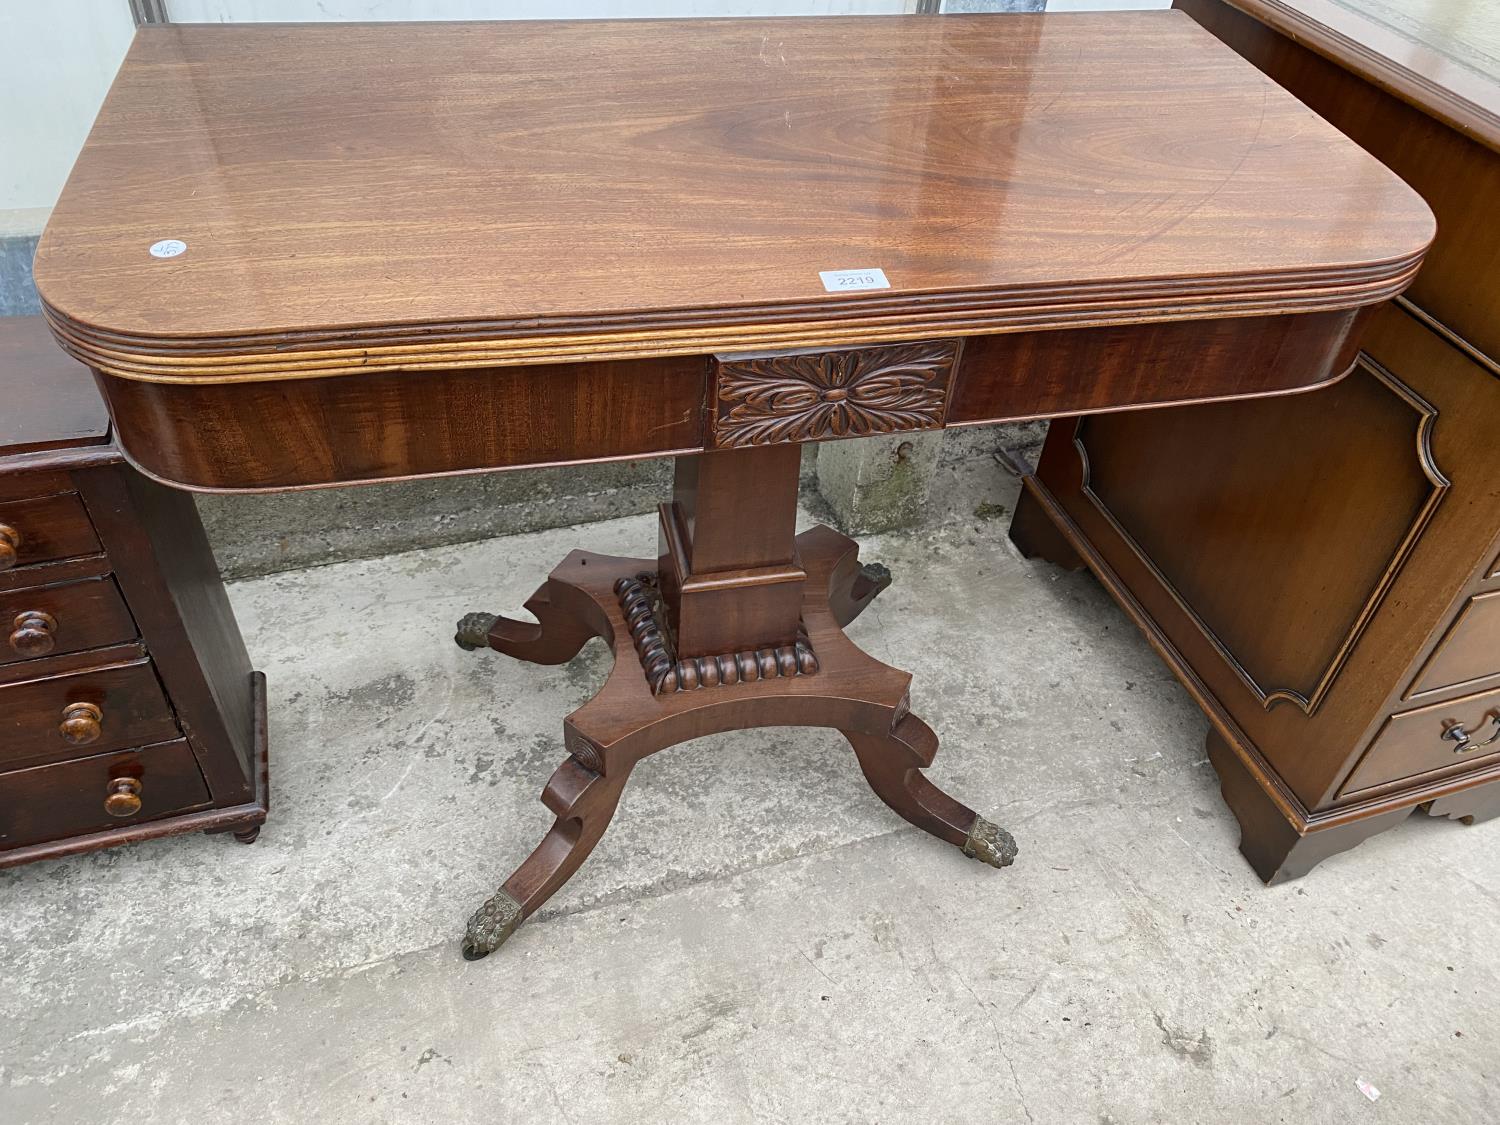 A 19TH CENTURY MAHOGANY FOLD-OVER CARD TABLE ON QUATREFOIL BASE WITH BRASS LION PAW FEET, 35" WIDE